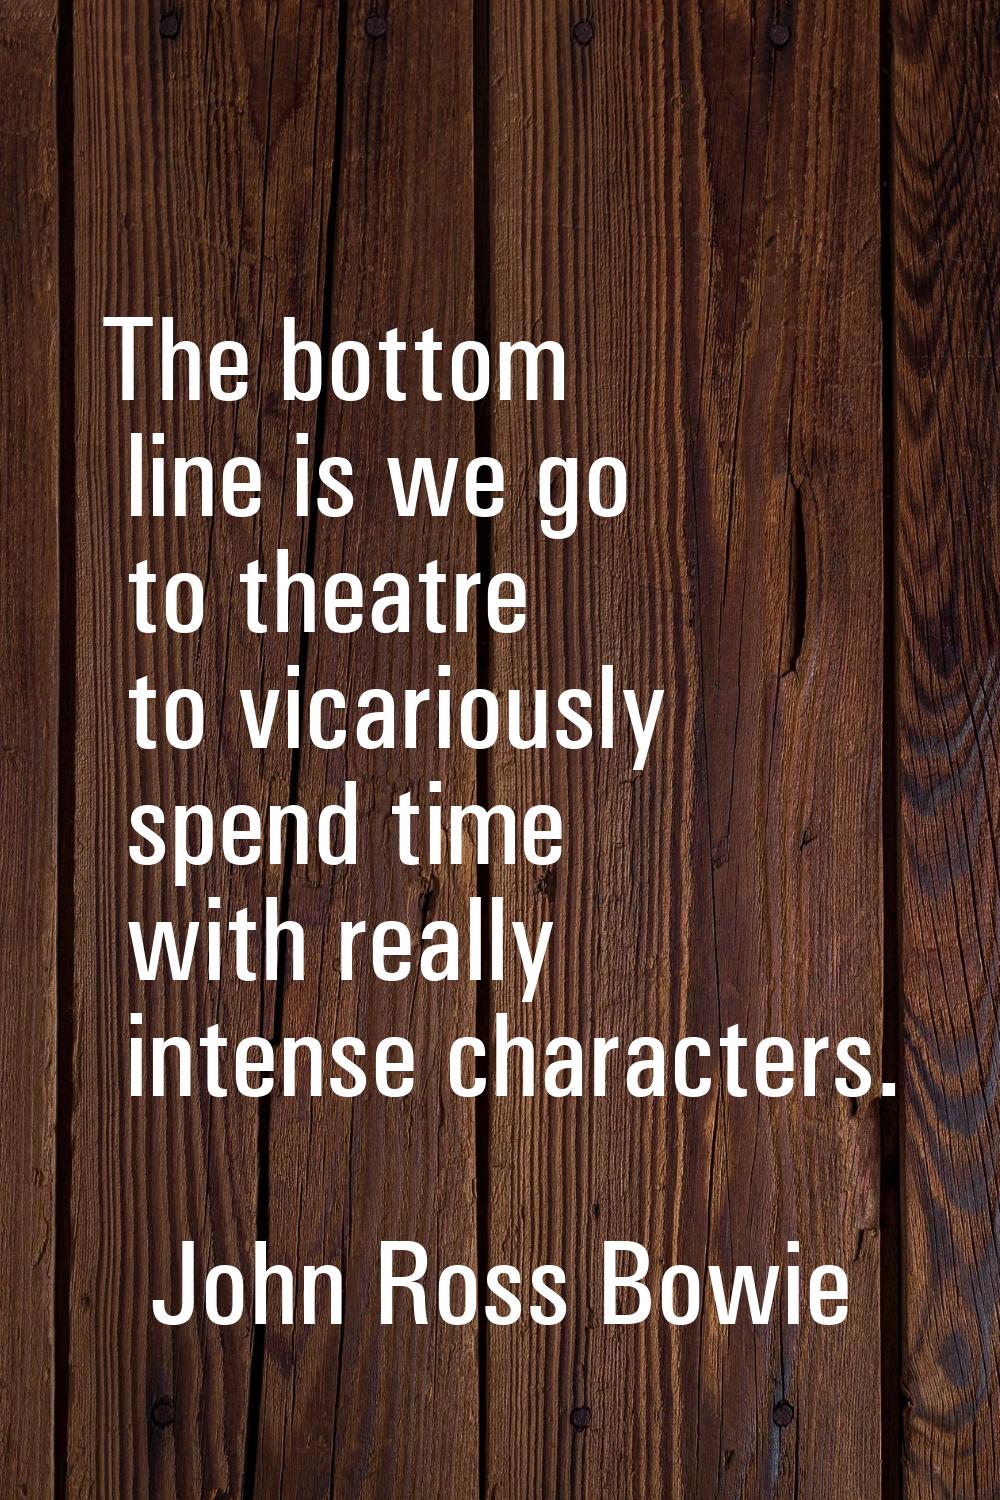 The bottom line is we go to theatre to vicariously spend time with really intense characters.